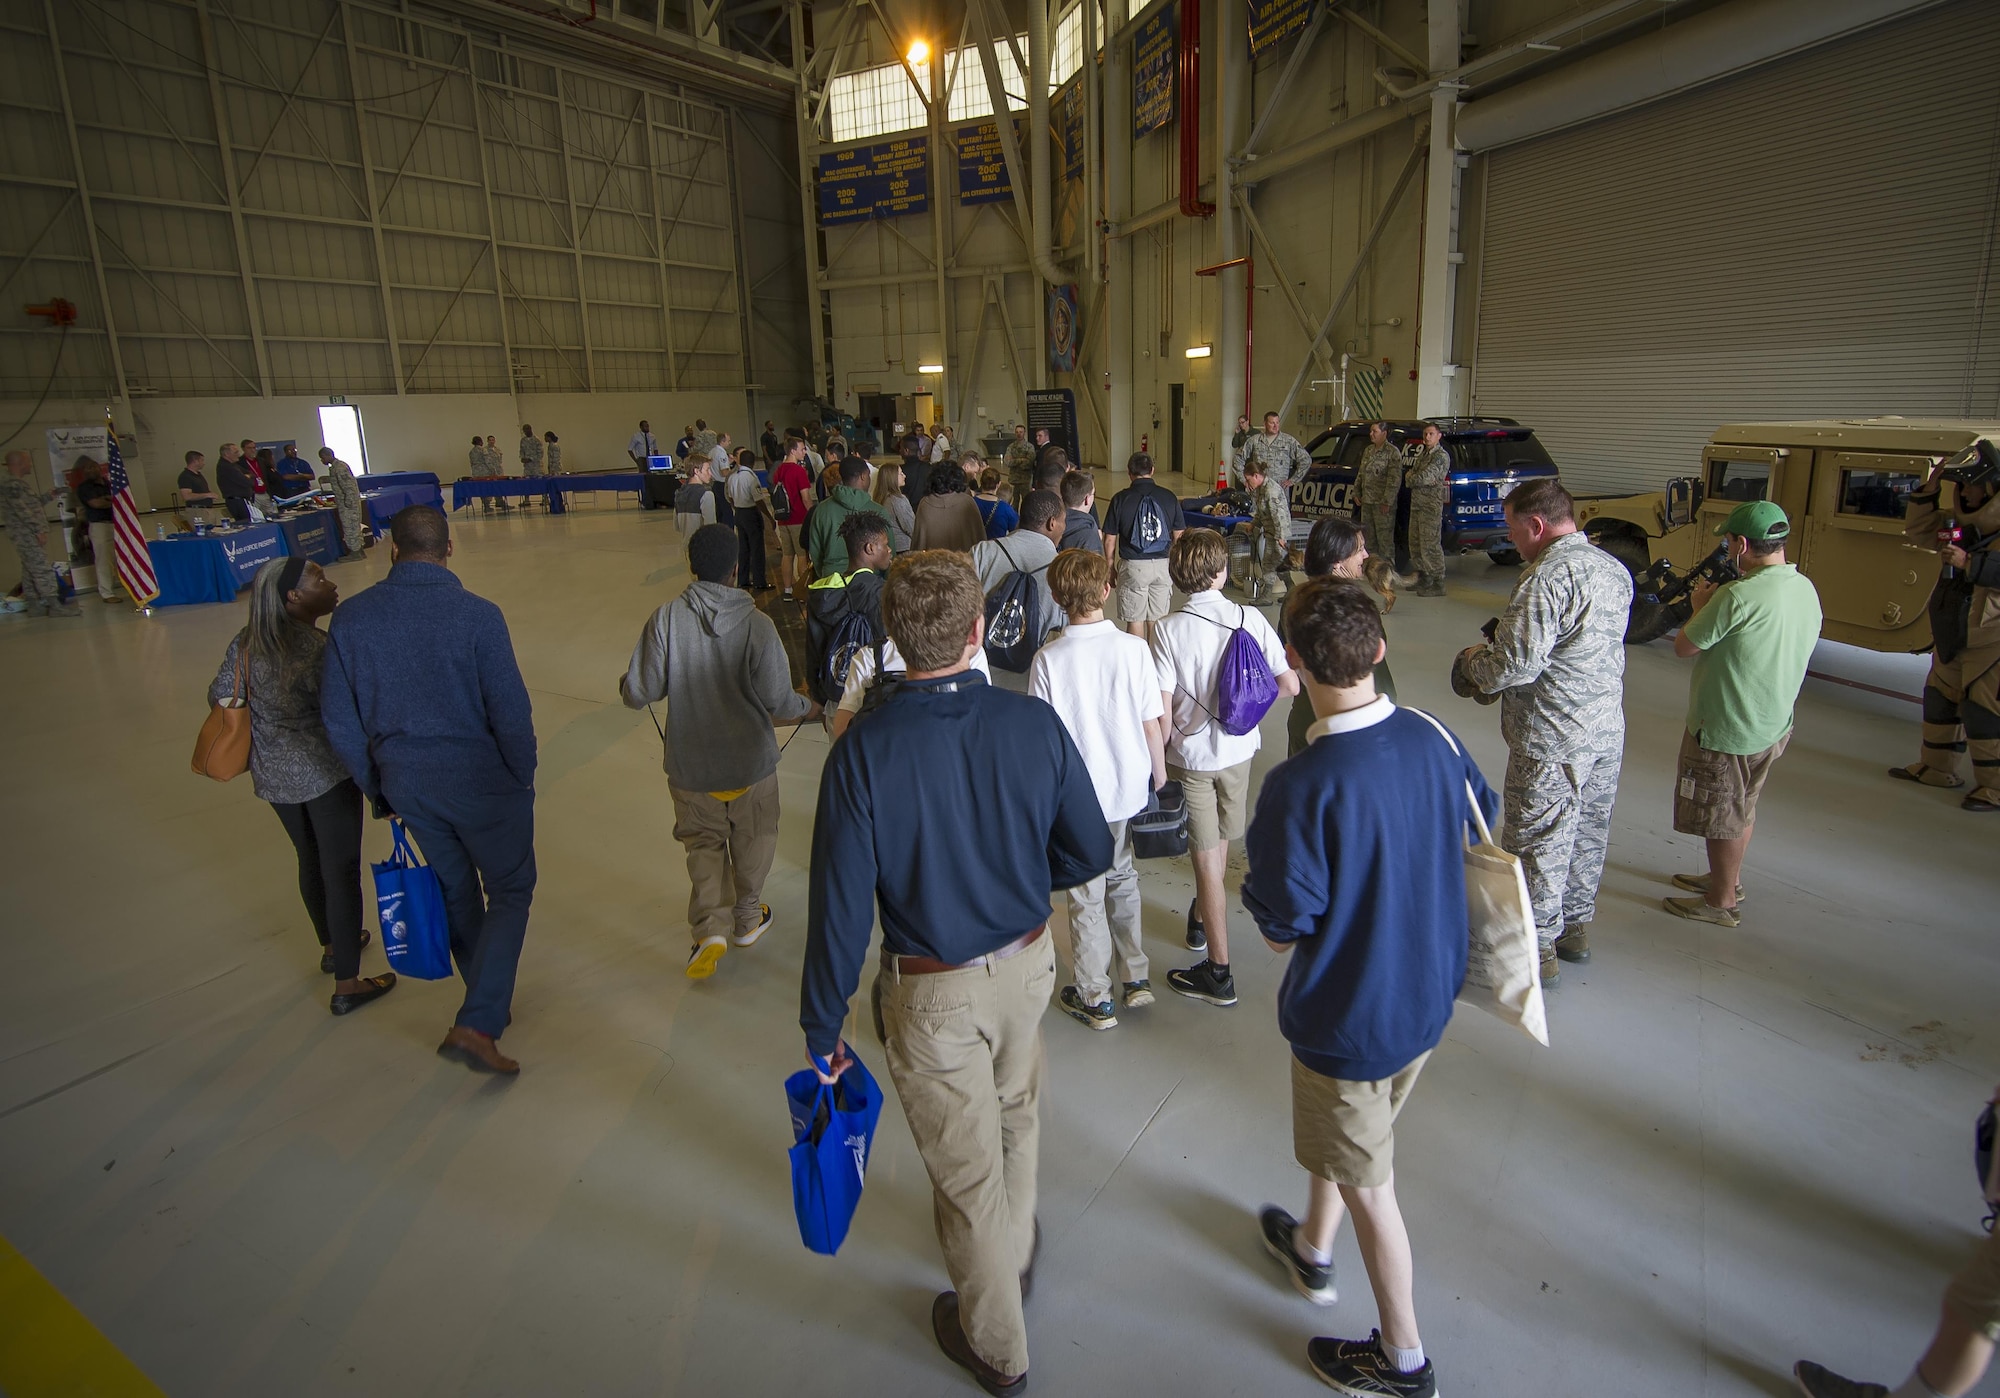 More than 150 students from middle and high school boys from 17 Lowcountry school visited Joint Base Charleston Feb. 23, 2017, to learn about jobs in aviation as part of the second annual Tuskegee Airmen Career Day, hosted by the 315th Airlift Wing. The boys were able to learn about military and civilian careers in aviation by more than 15 different career fields. (U.S. Air Force photo by Senior Airman Tom Brading)